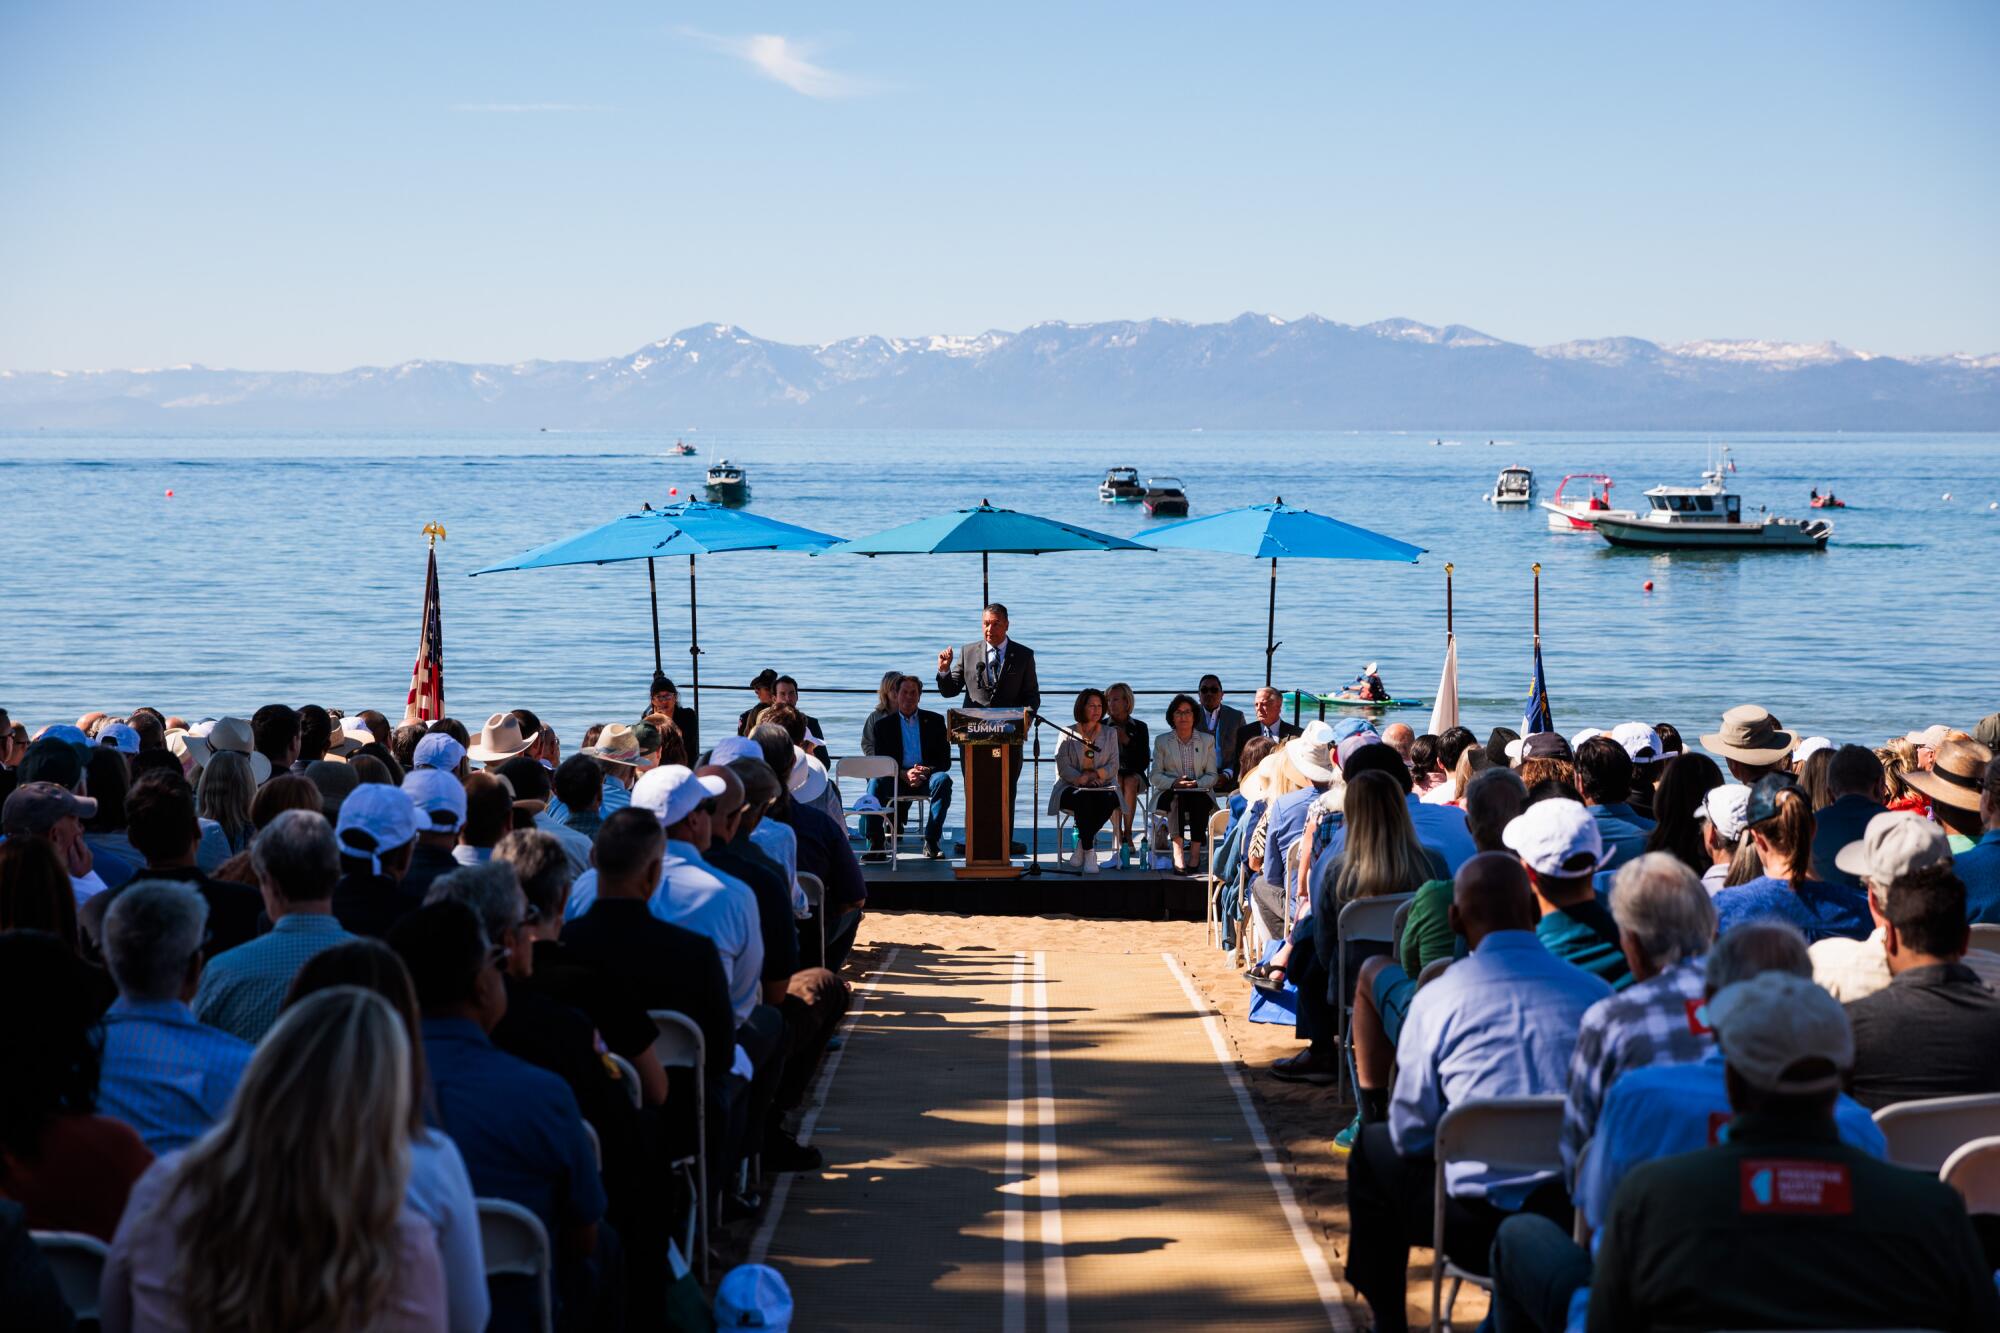 Seated people look at speaker at a lectern by a body of water.